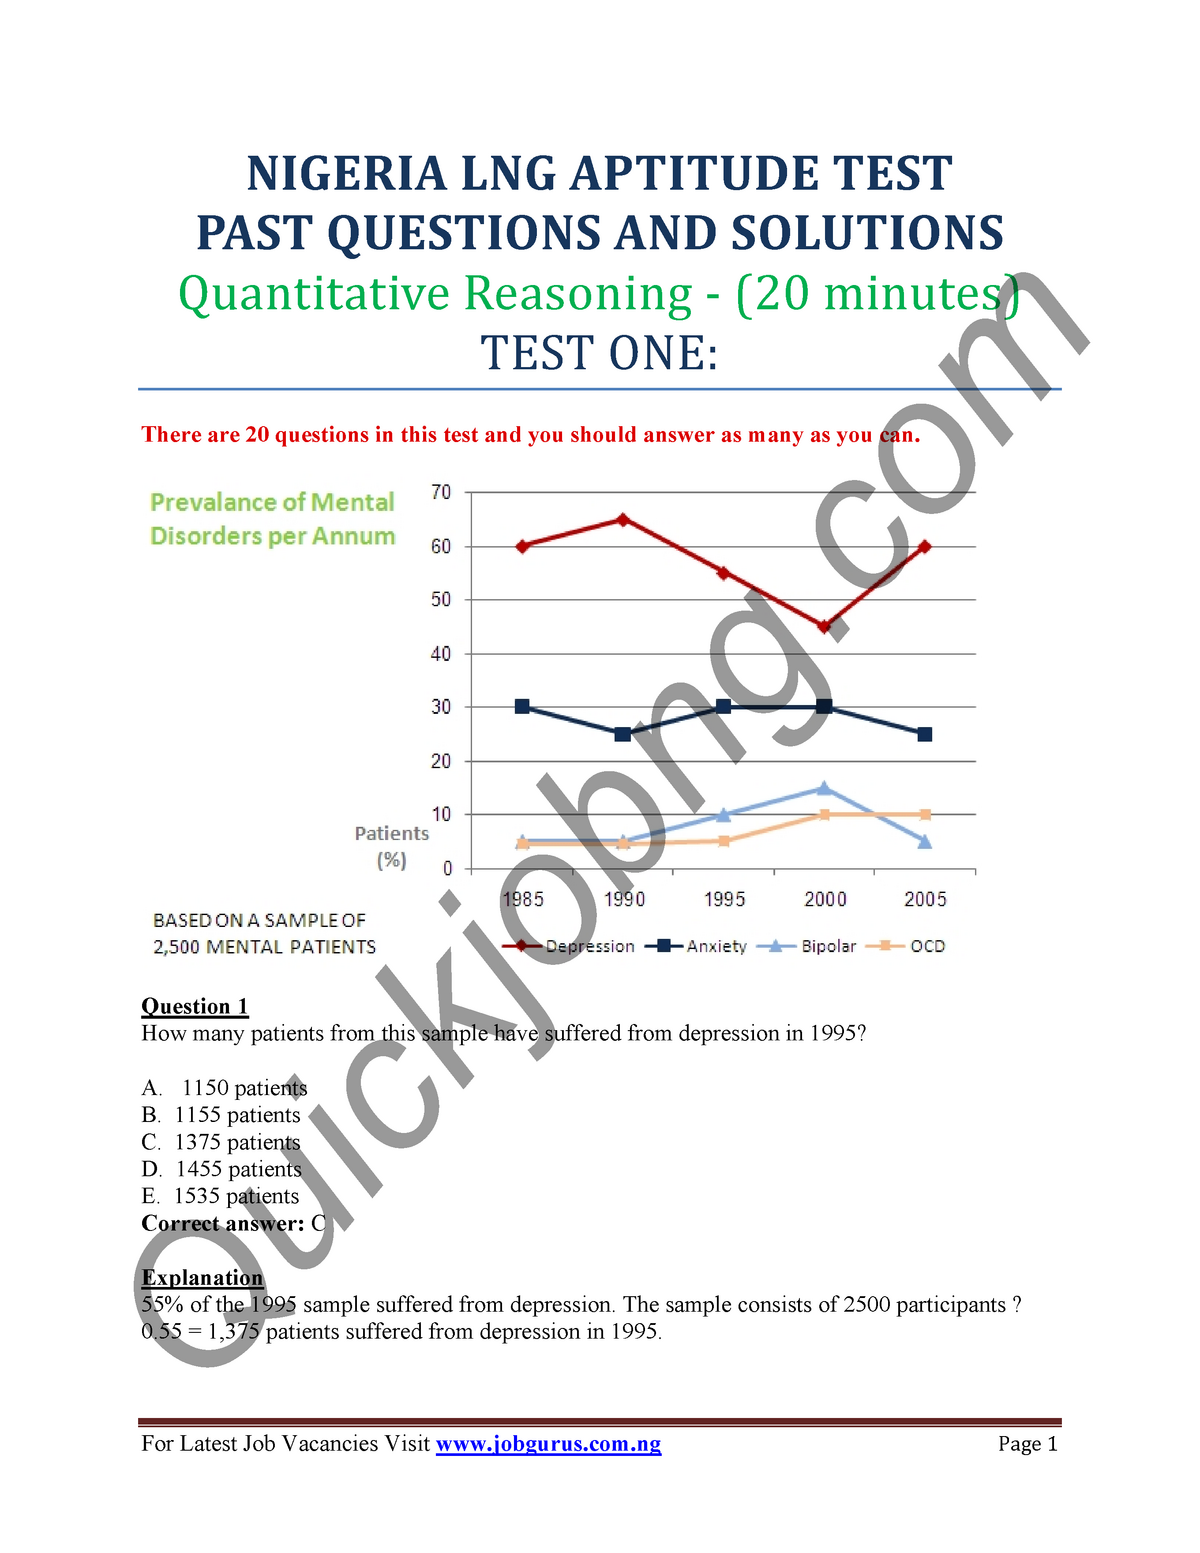 nlng-aptitude-test-quickjobng-nigeria-lng-aptitude-test-past-questions-and-solutions